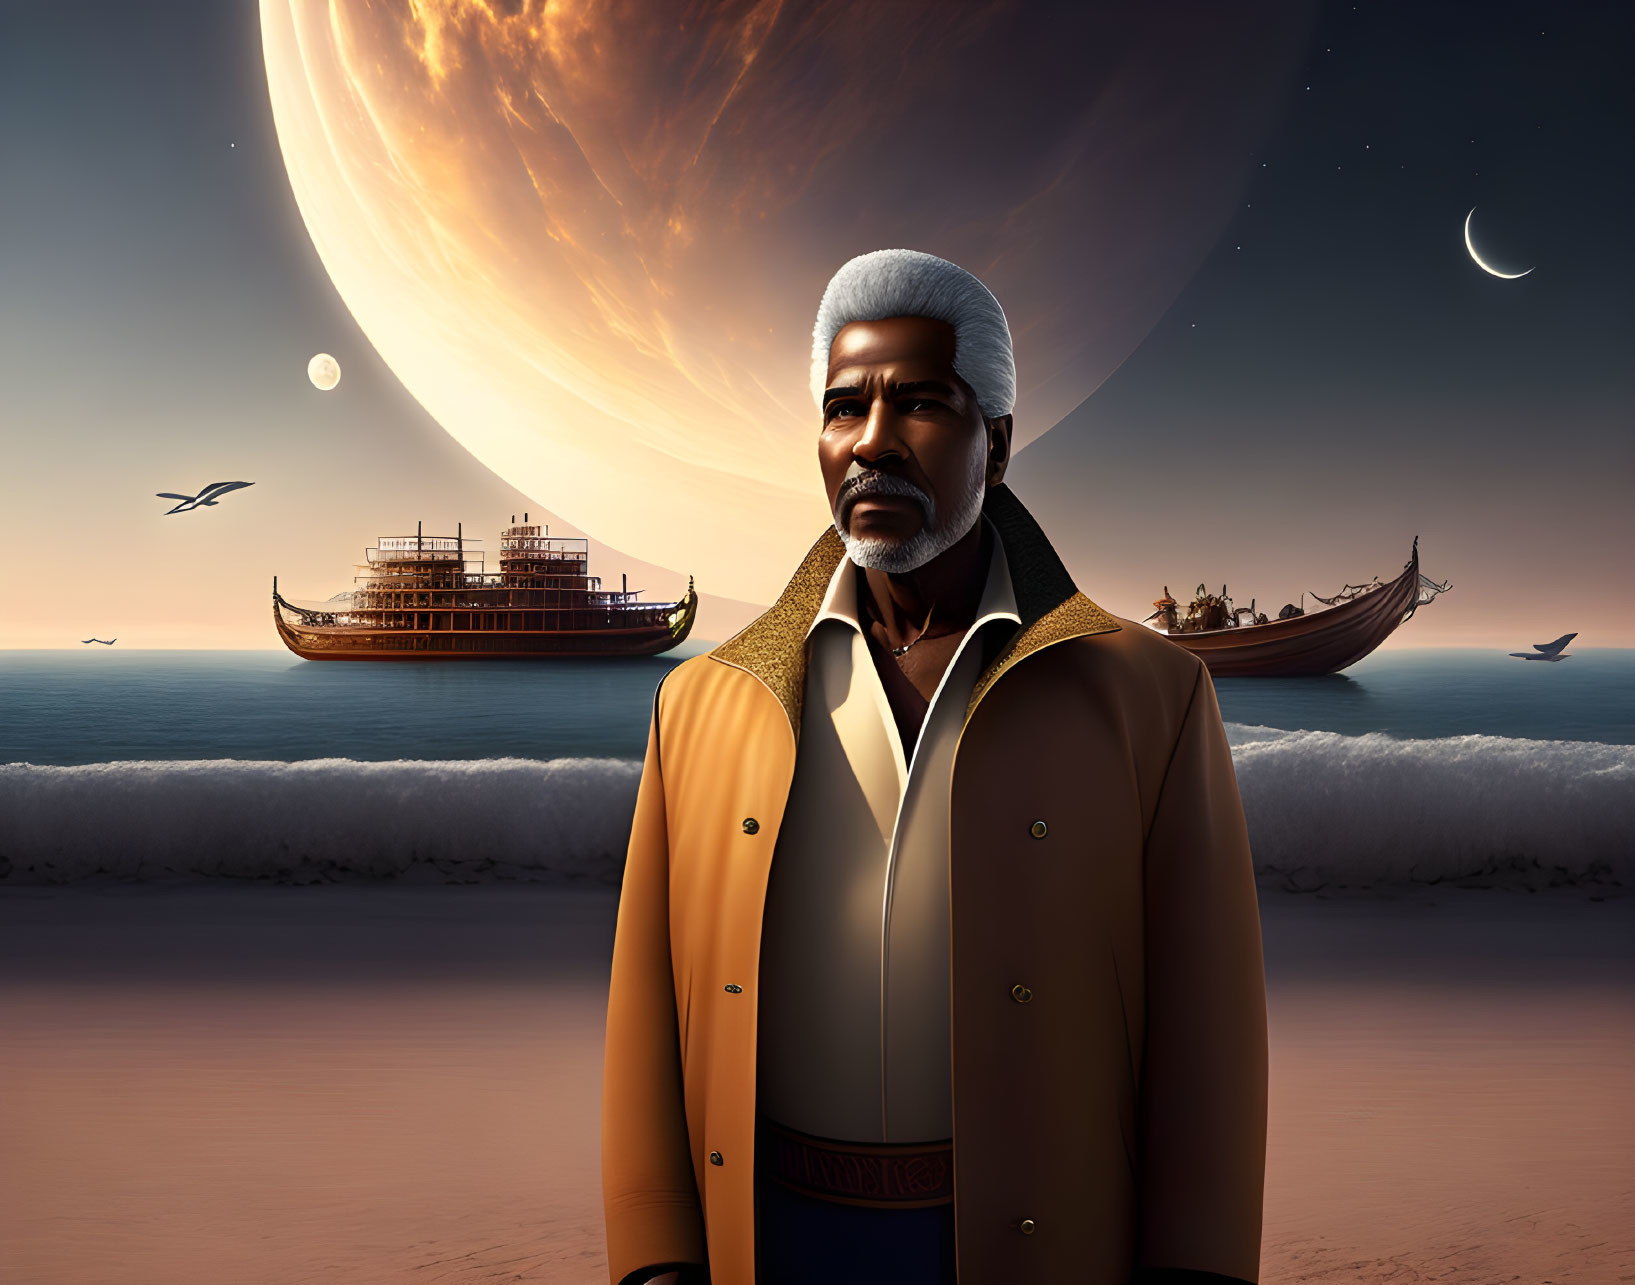 White-bearded man on beach at sunset with large planet and boats.